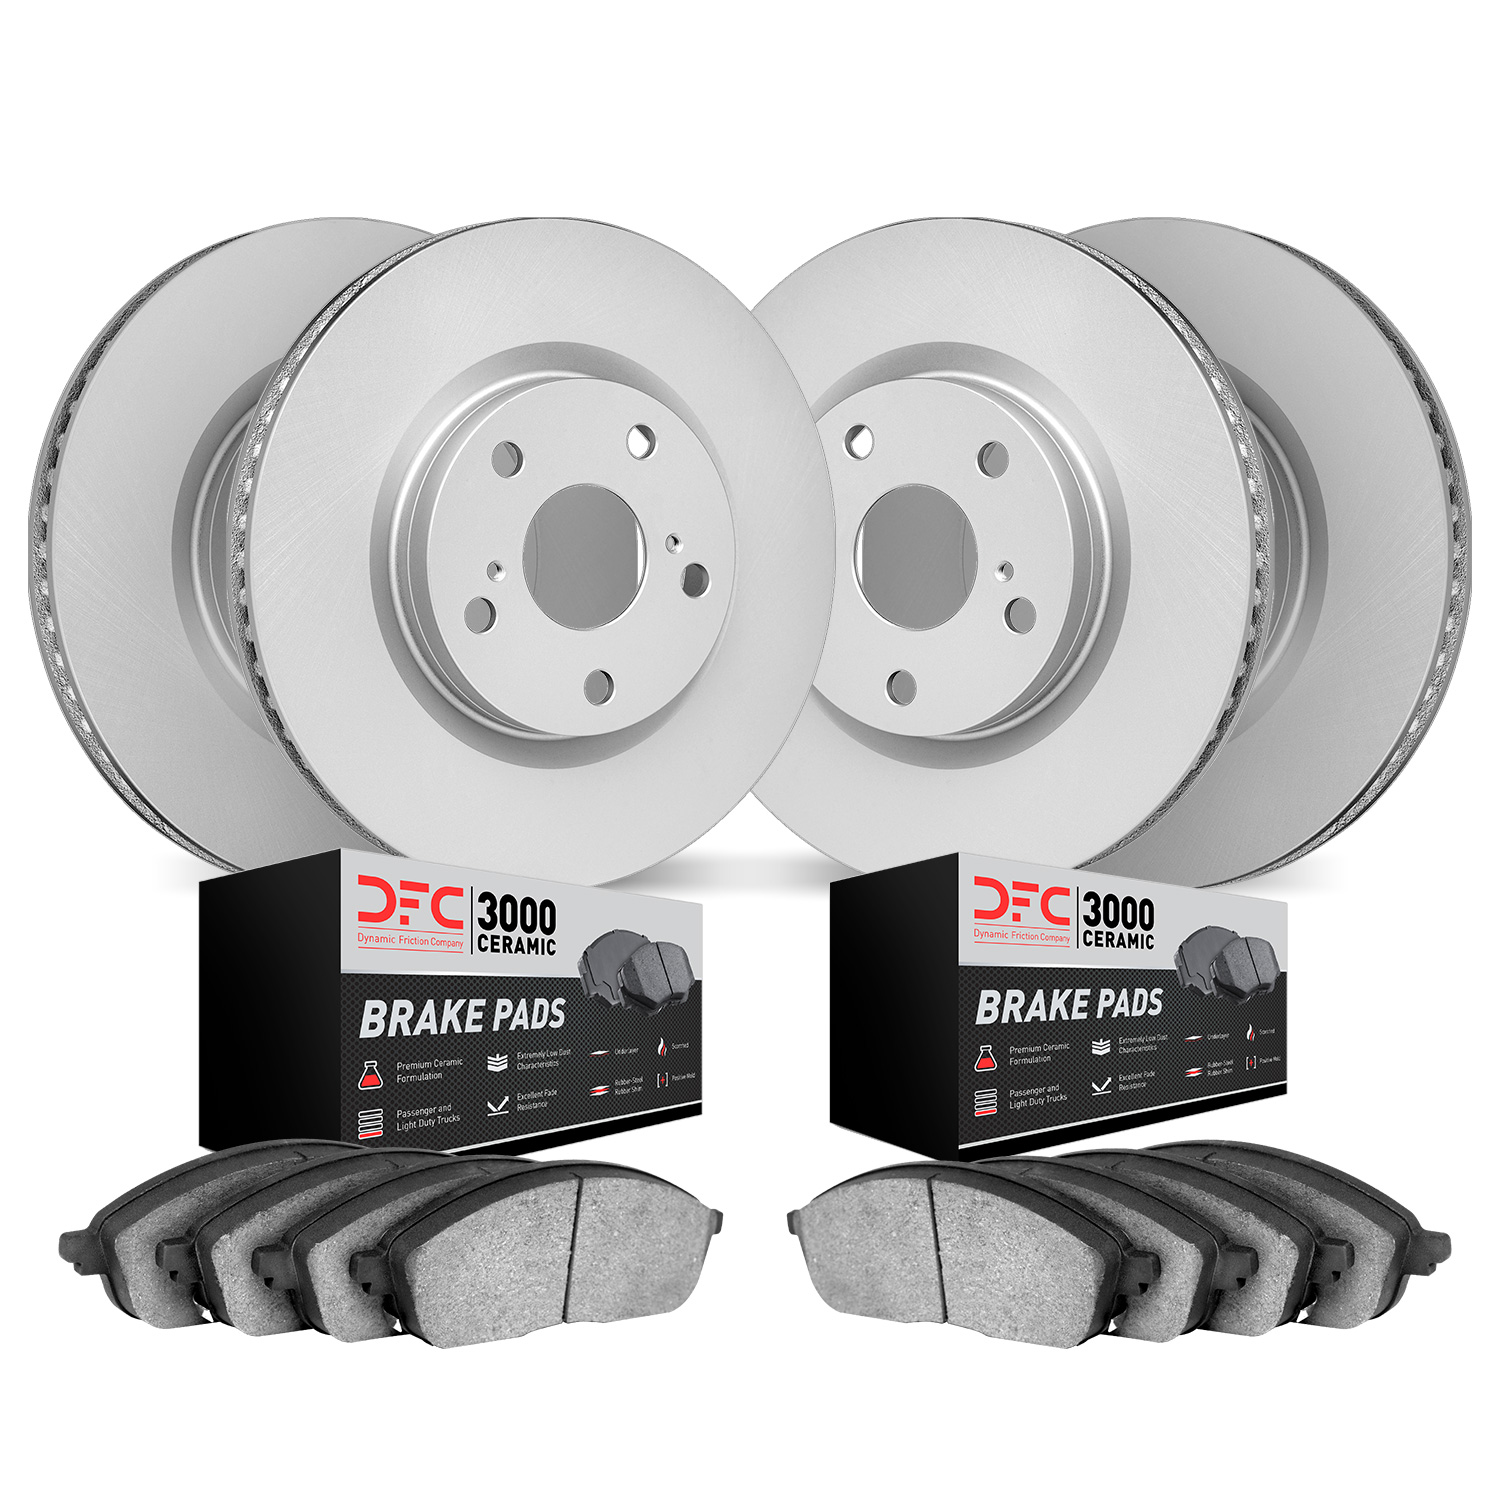 4304-73026 Geospec Brake Rotors with 3000-Series Ceramic Brake Pads Kit, 2005-2011 Audi/Volkswagen, Position: Front and Rear